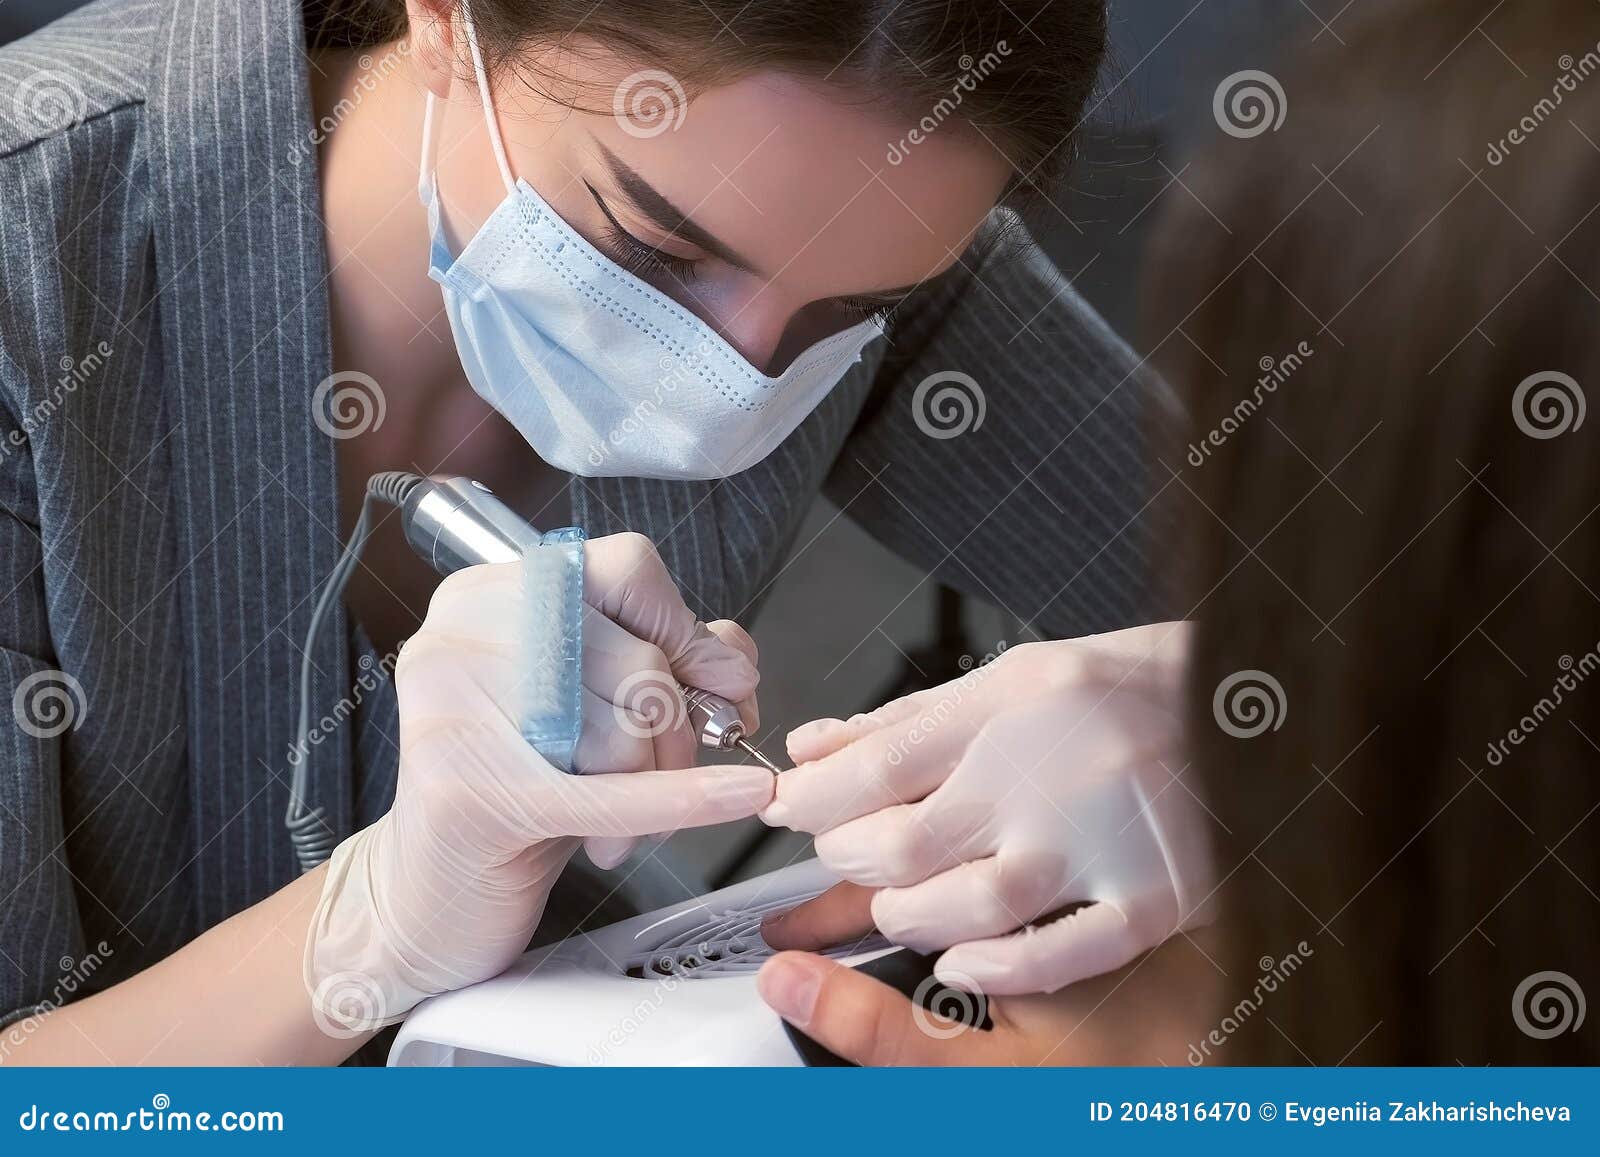 portrait of woman manicurist in mask cleaning pterygium on nail using apparatus.